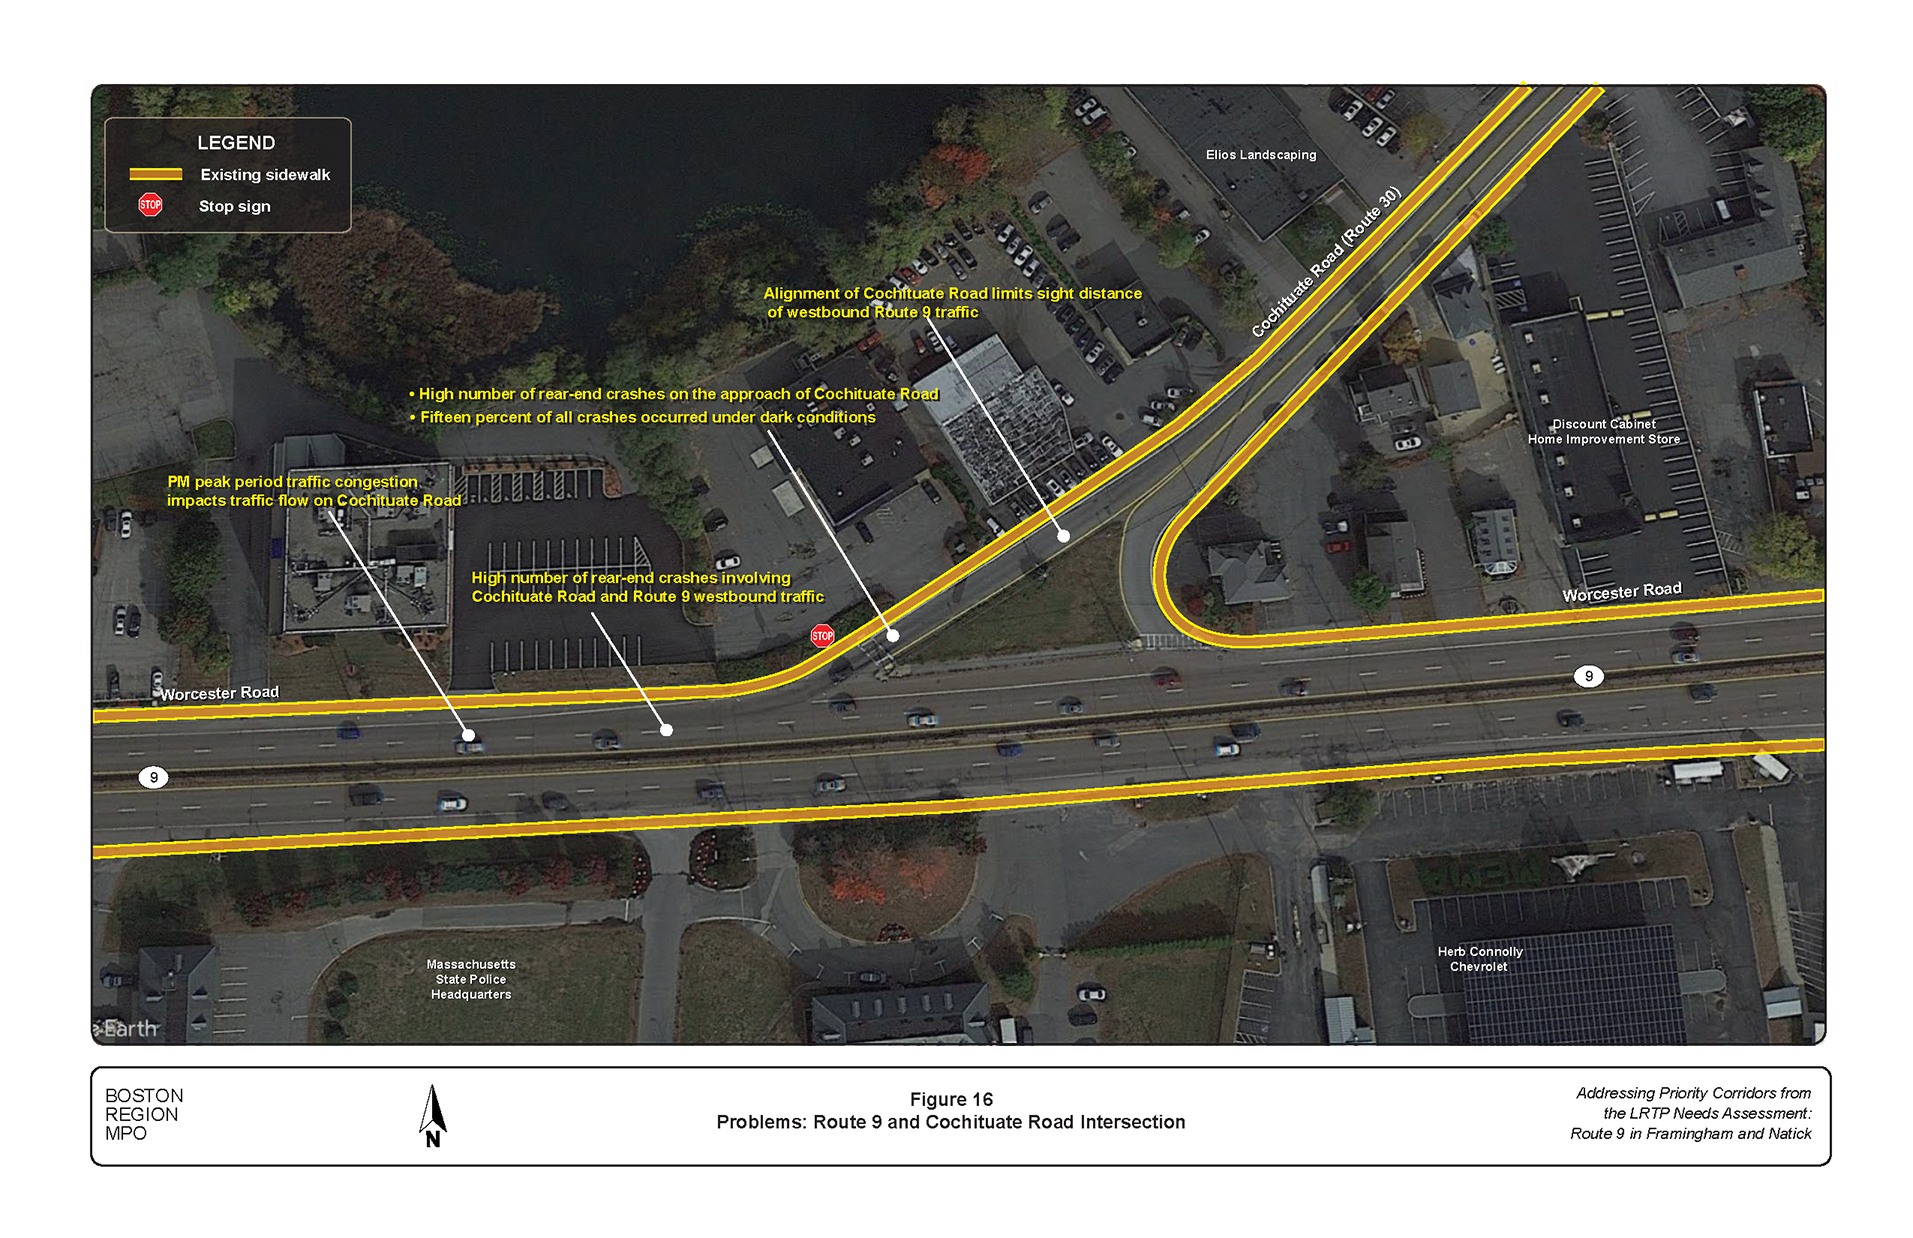 Figure 16 is an aerial photo showing the intersection of Route 9 and Cochituate Road and the problems